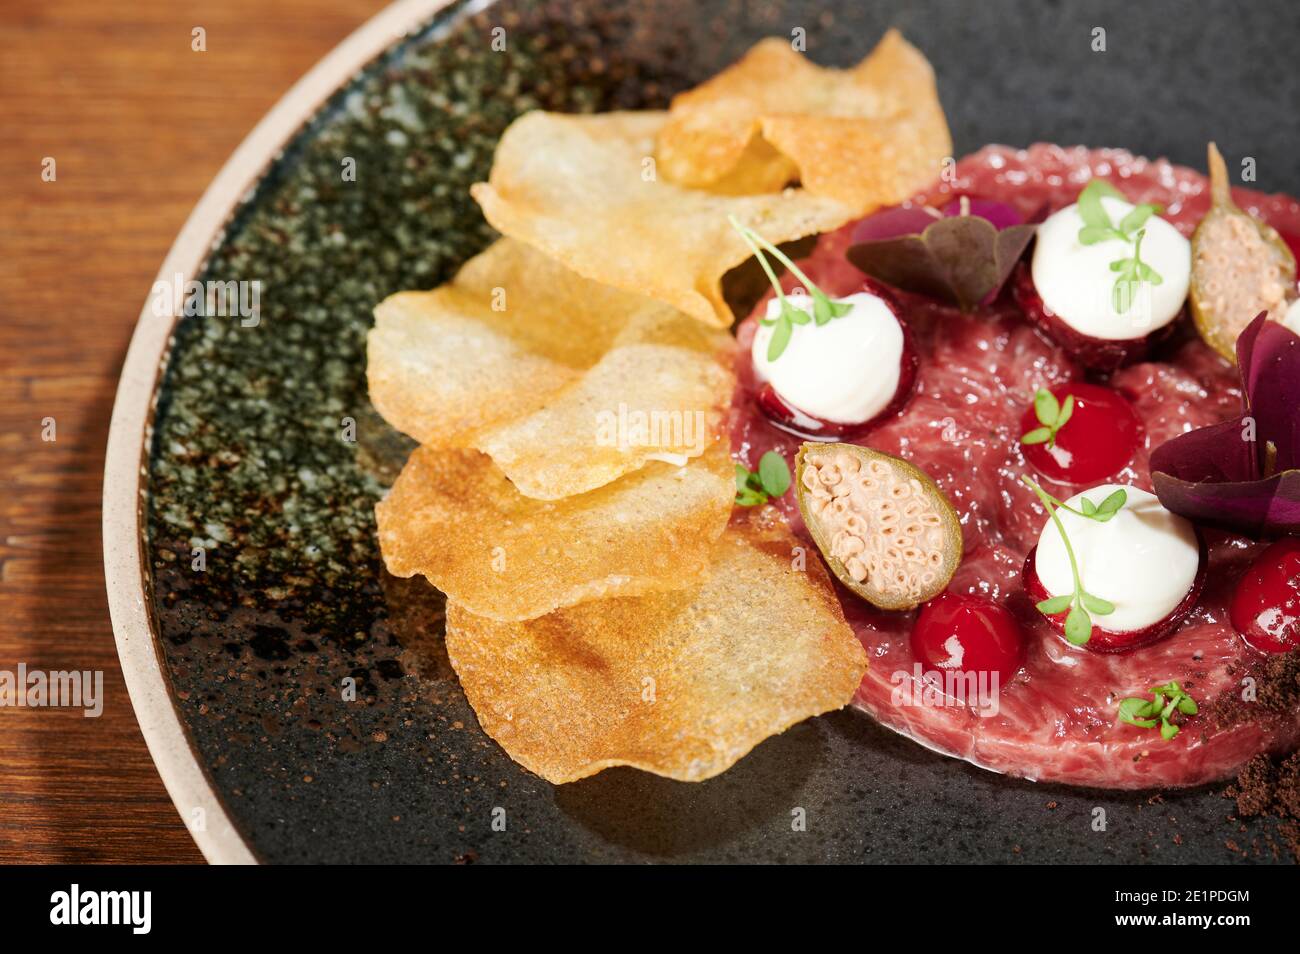 Delicious tartare meal with chips and tomato close up view Stock Photo